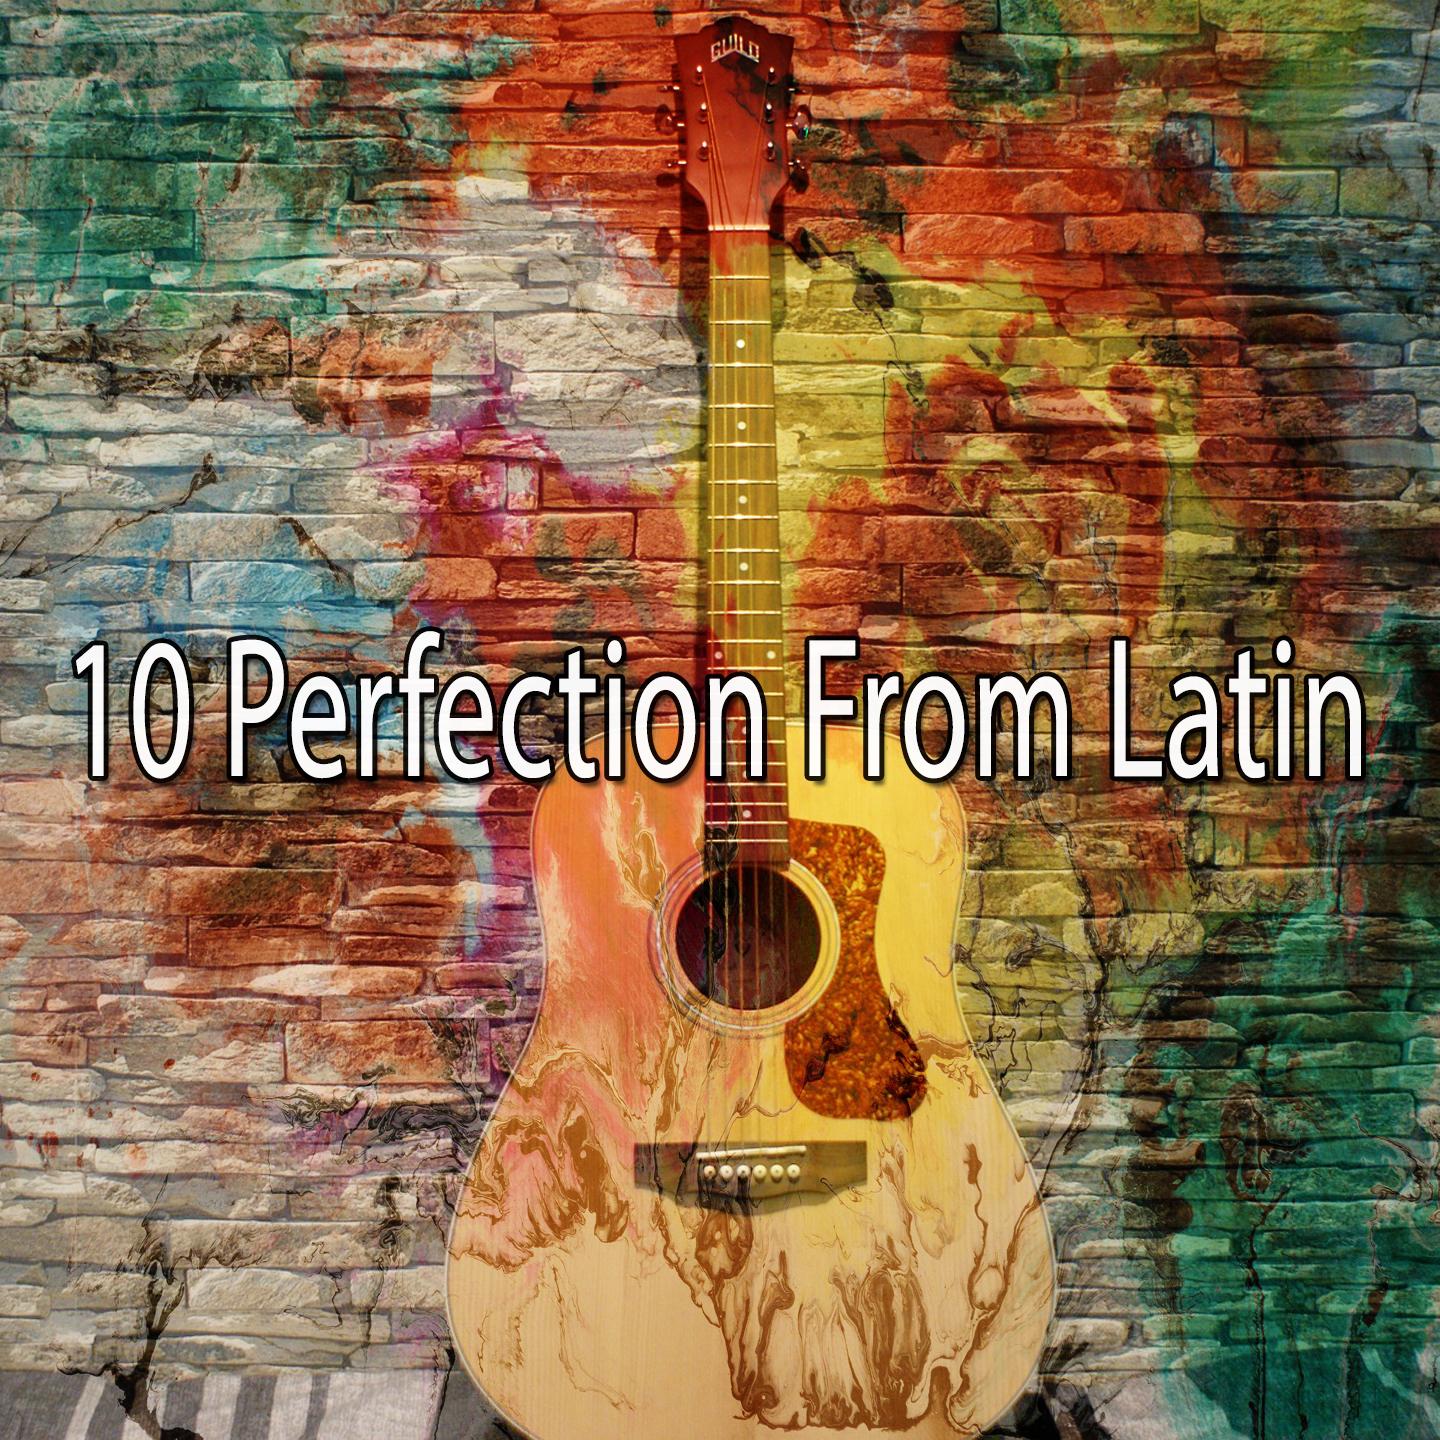 10 Perfection from Latin